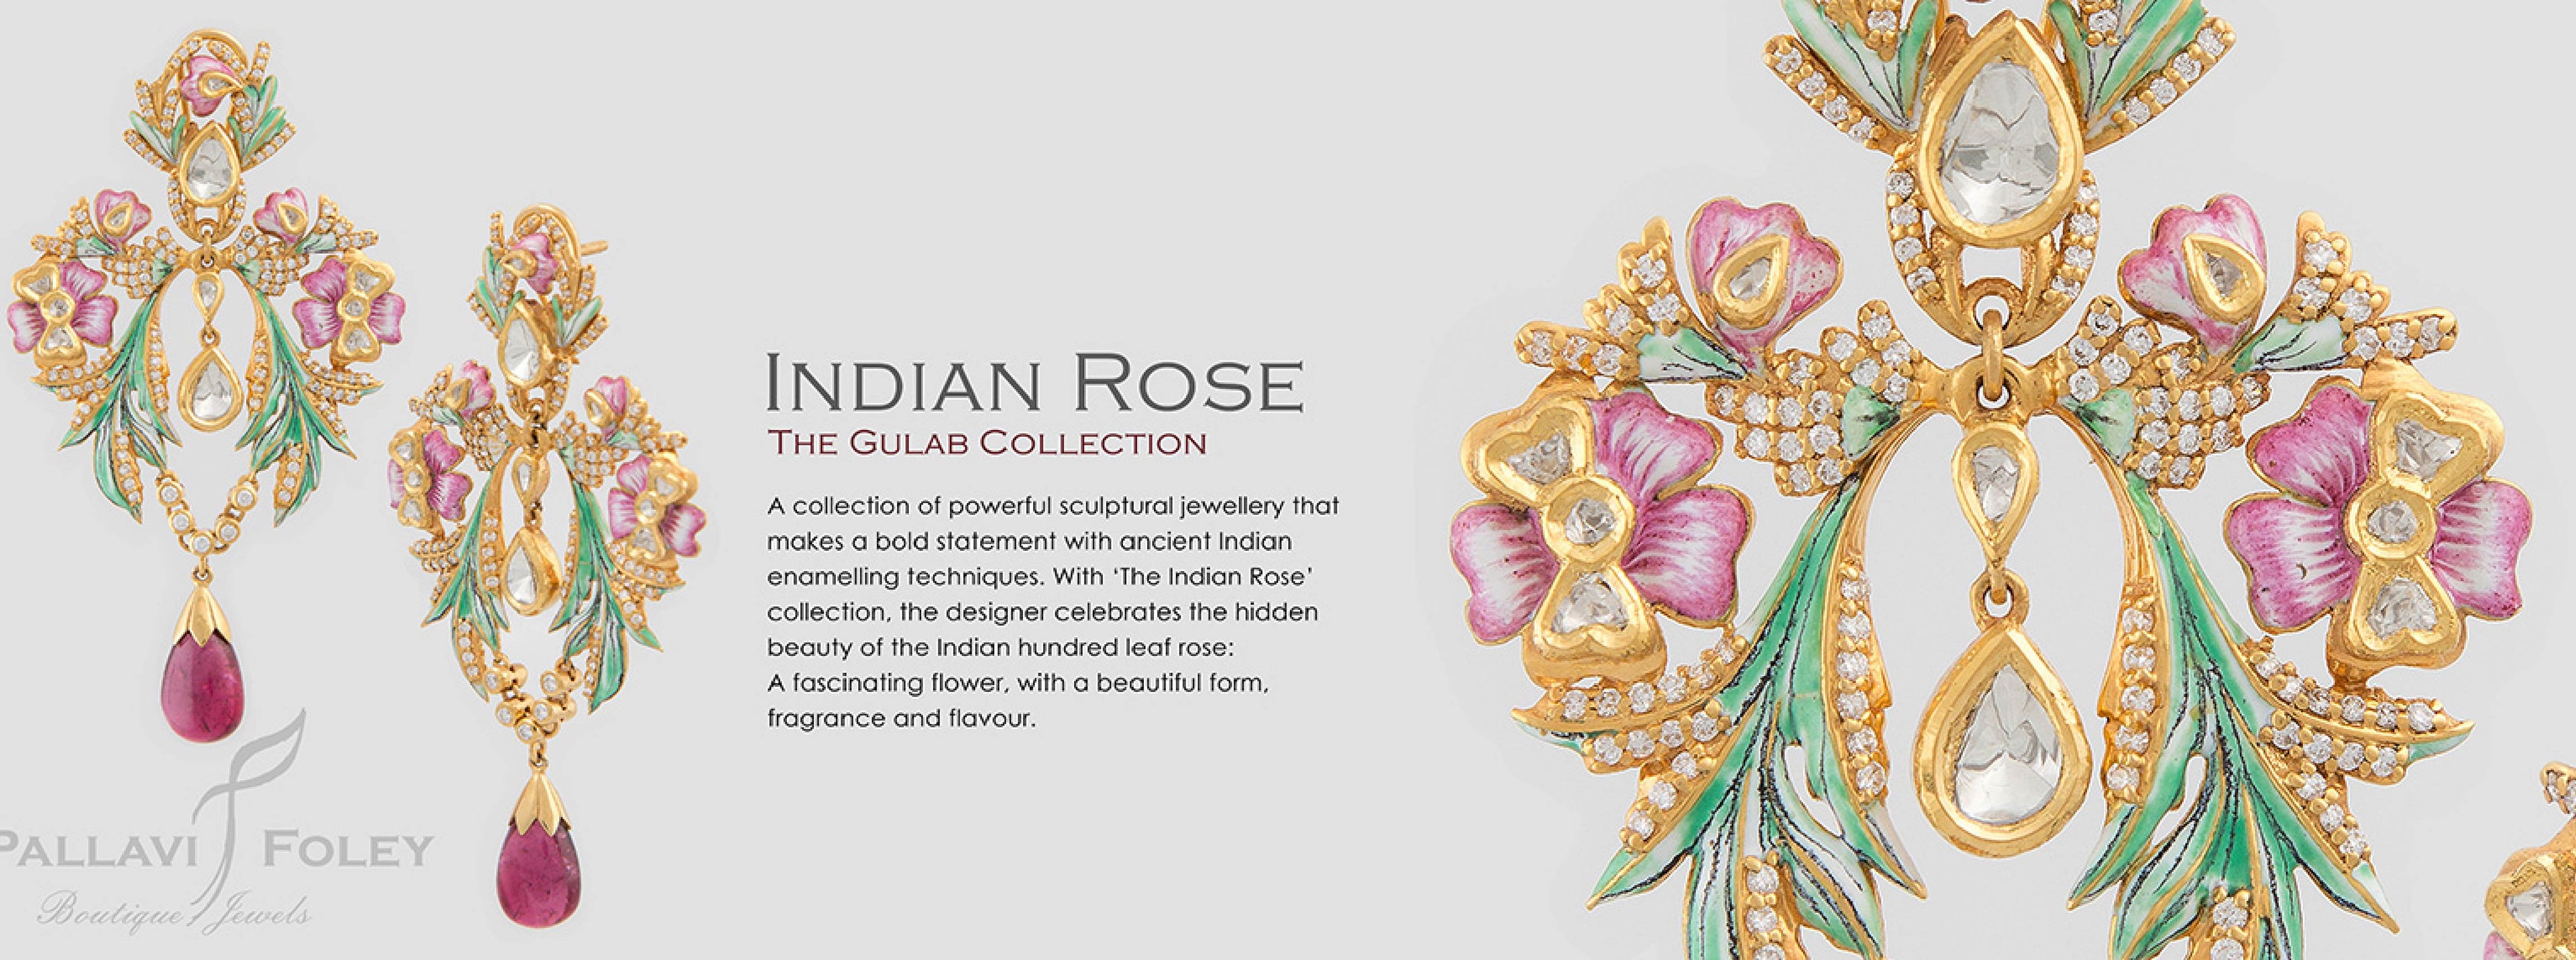 The Indian Rose